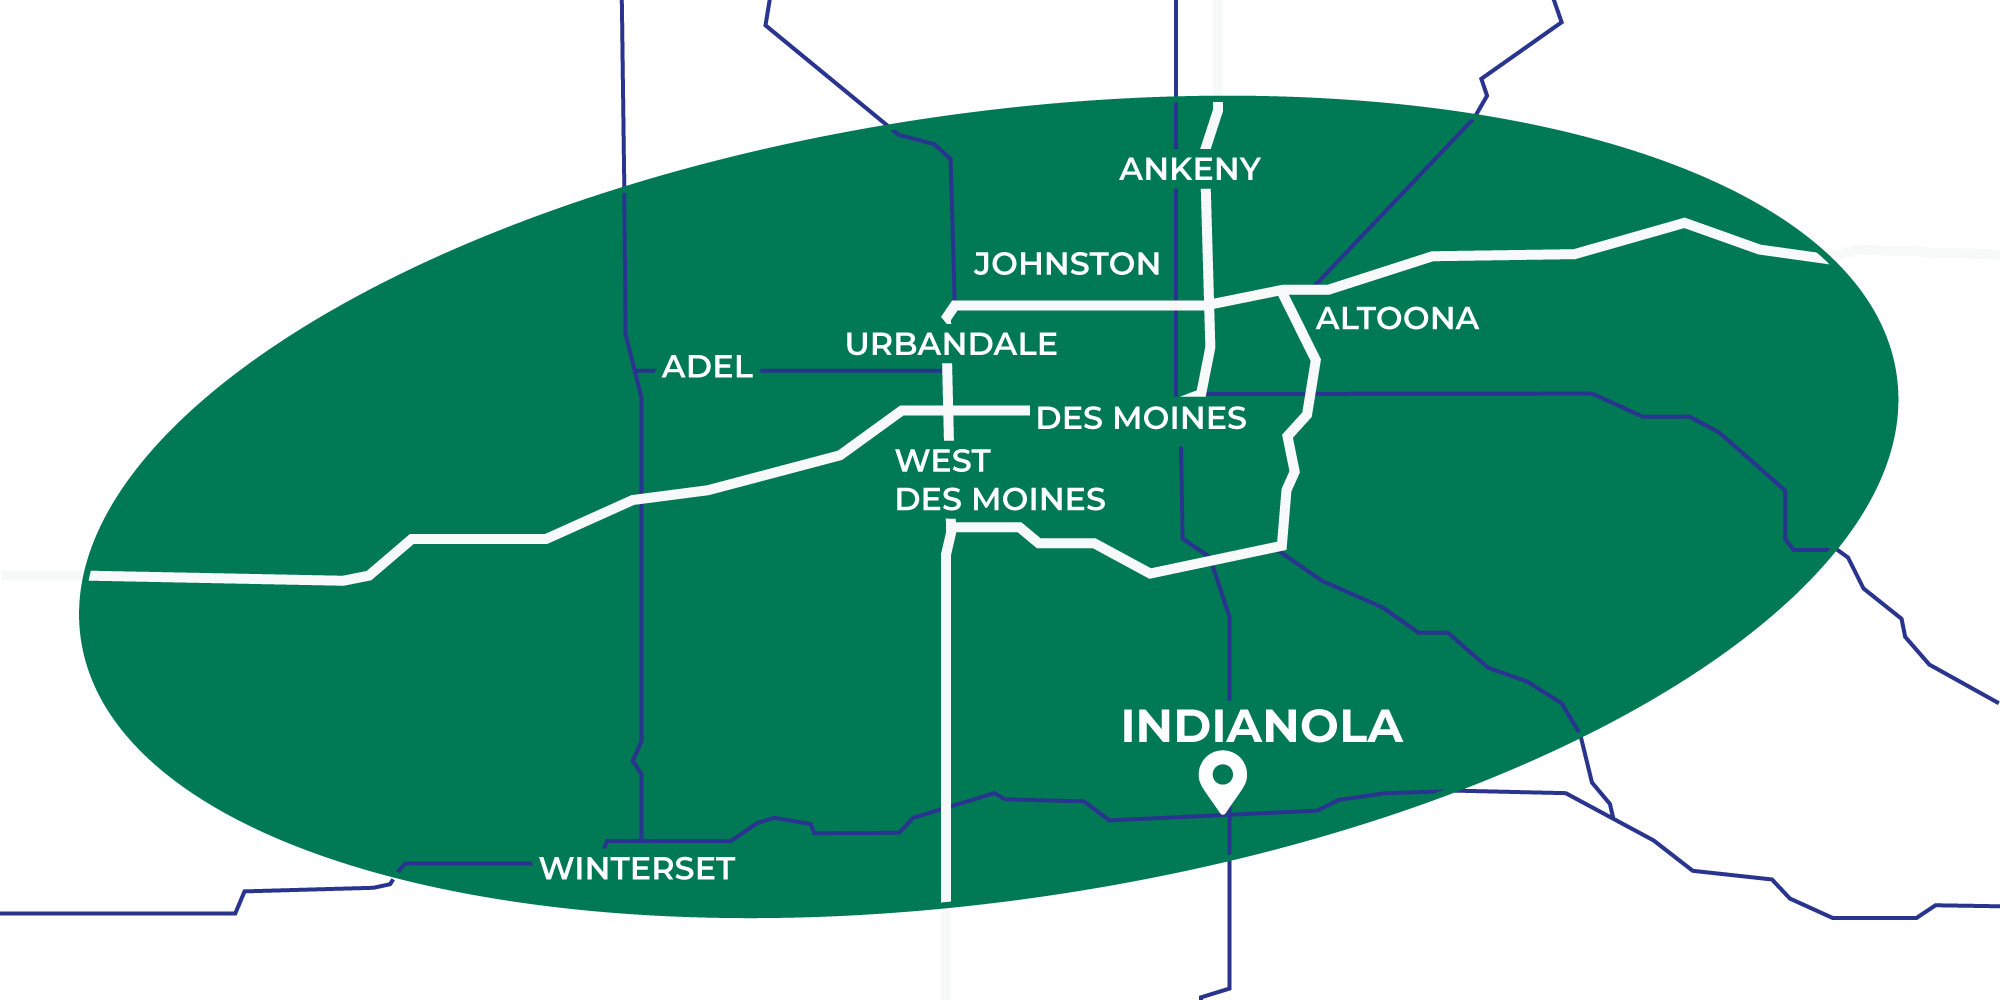 Service area map for PRO-TURF Services lawn and turf care, including Des Moines, Urbandale, Earlham, Winterset, and Ankeny.